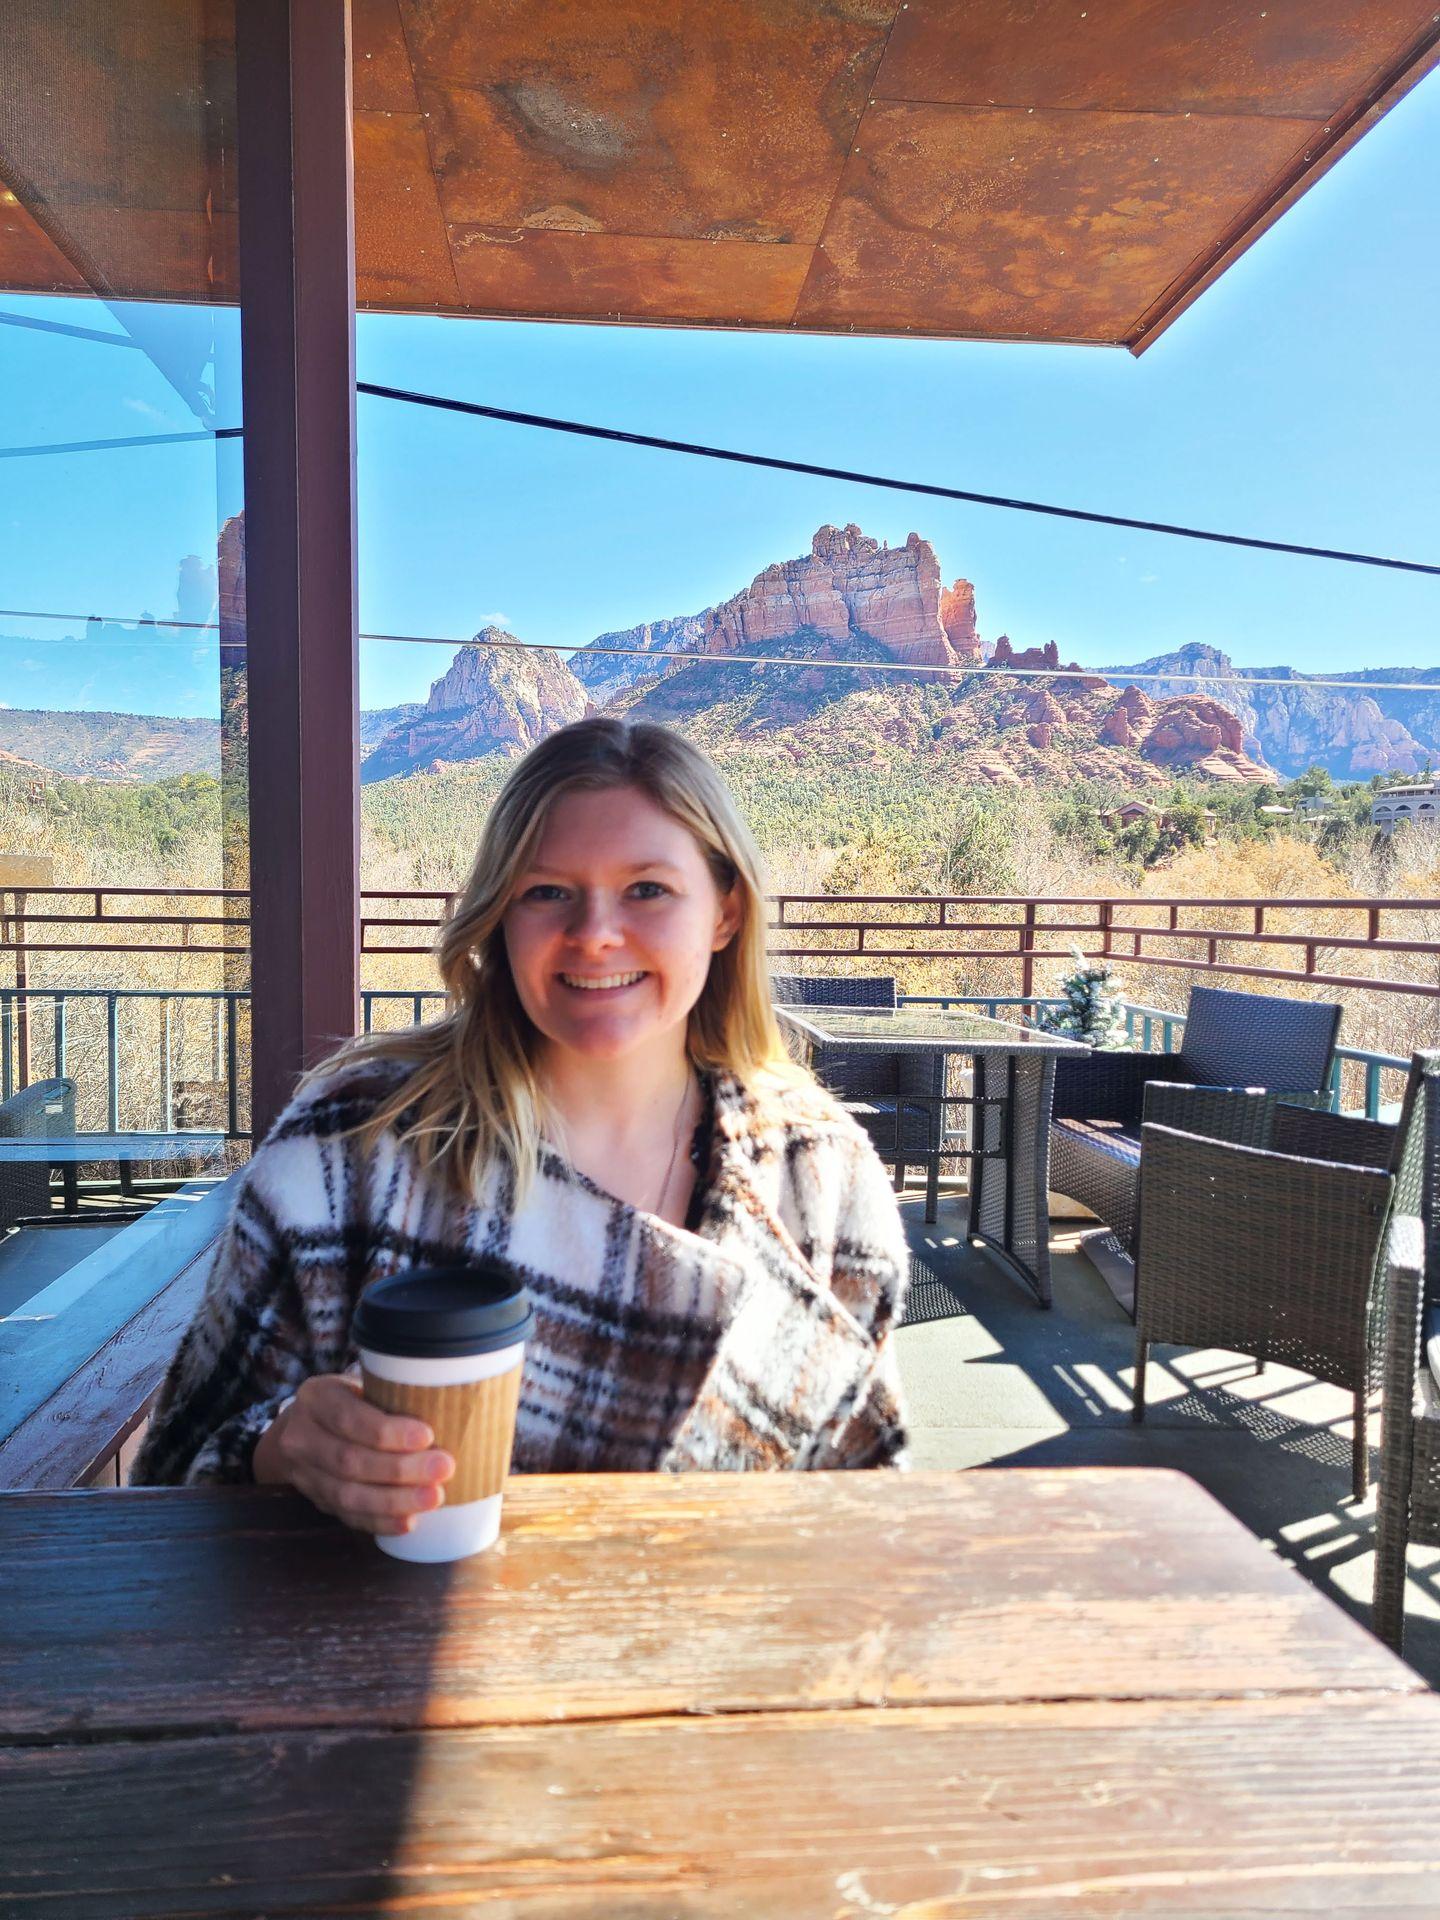 Lydia sitting at a table holding a coffee. There are orange rock views in the distance.